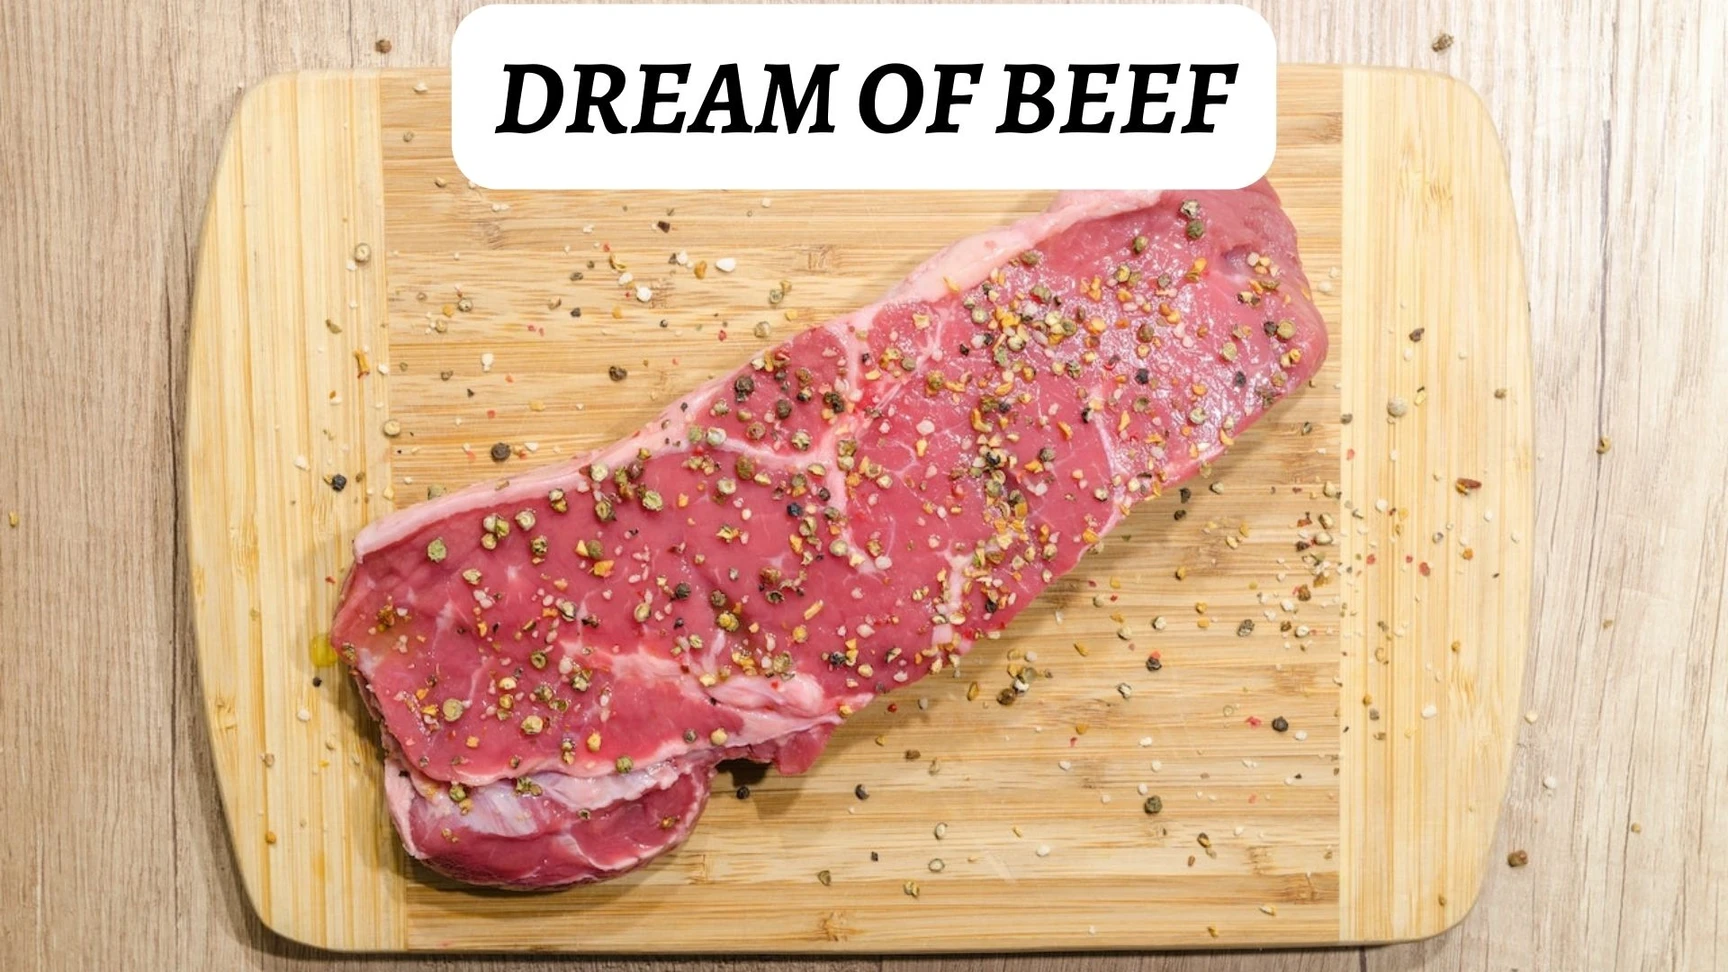 Dreaming Of Meat: General Overview